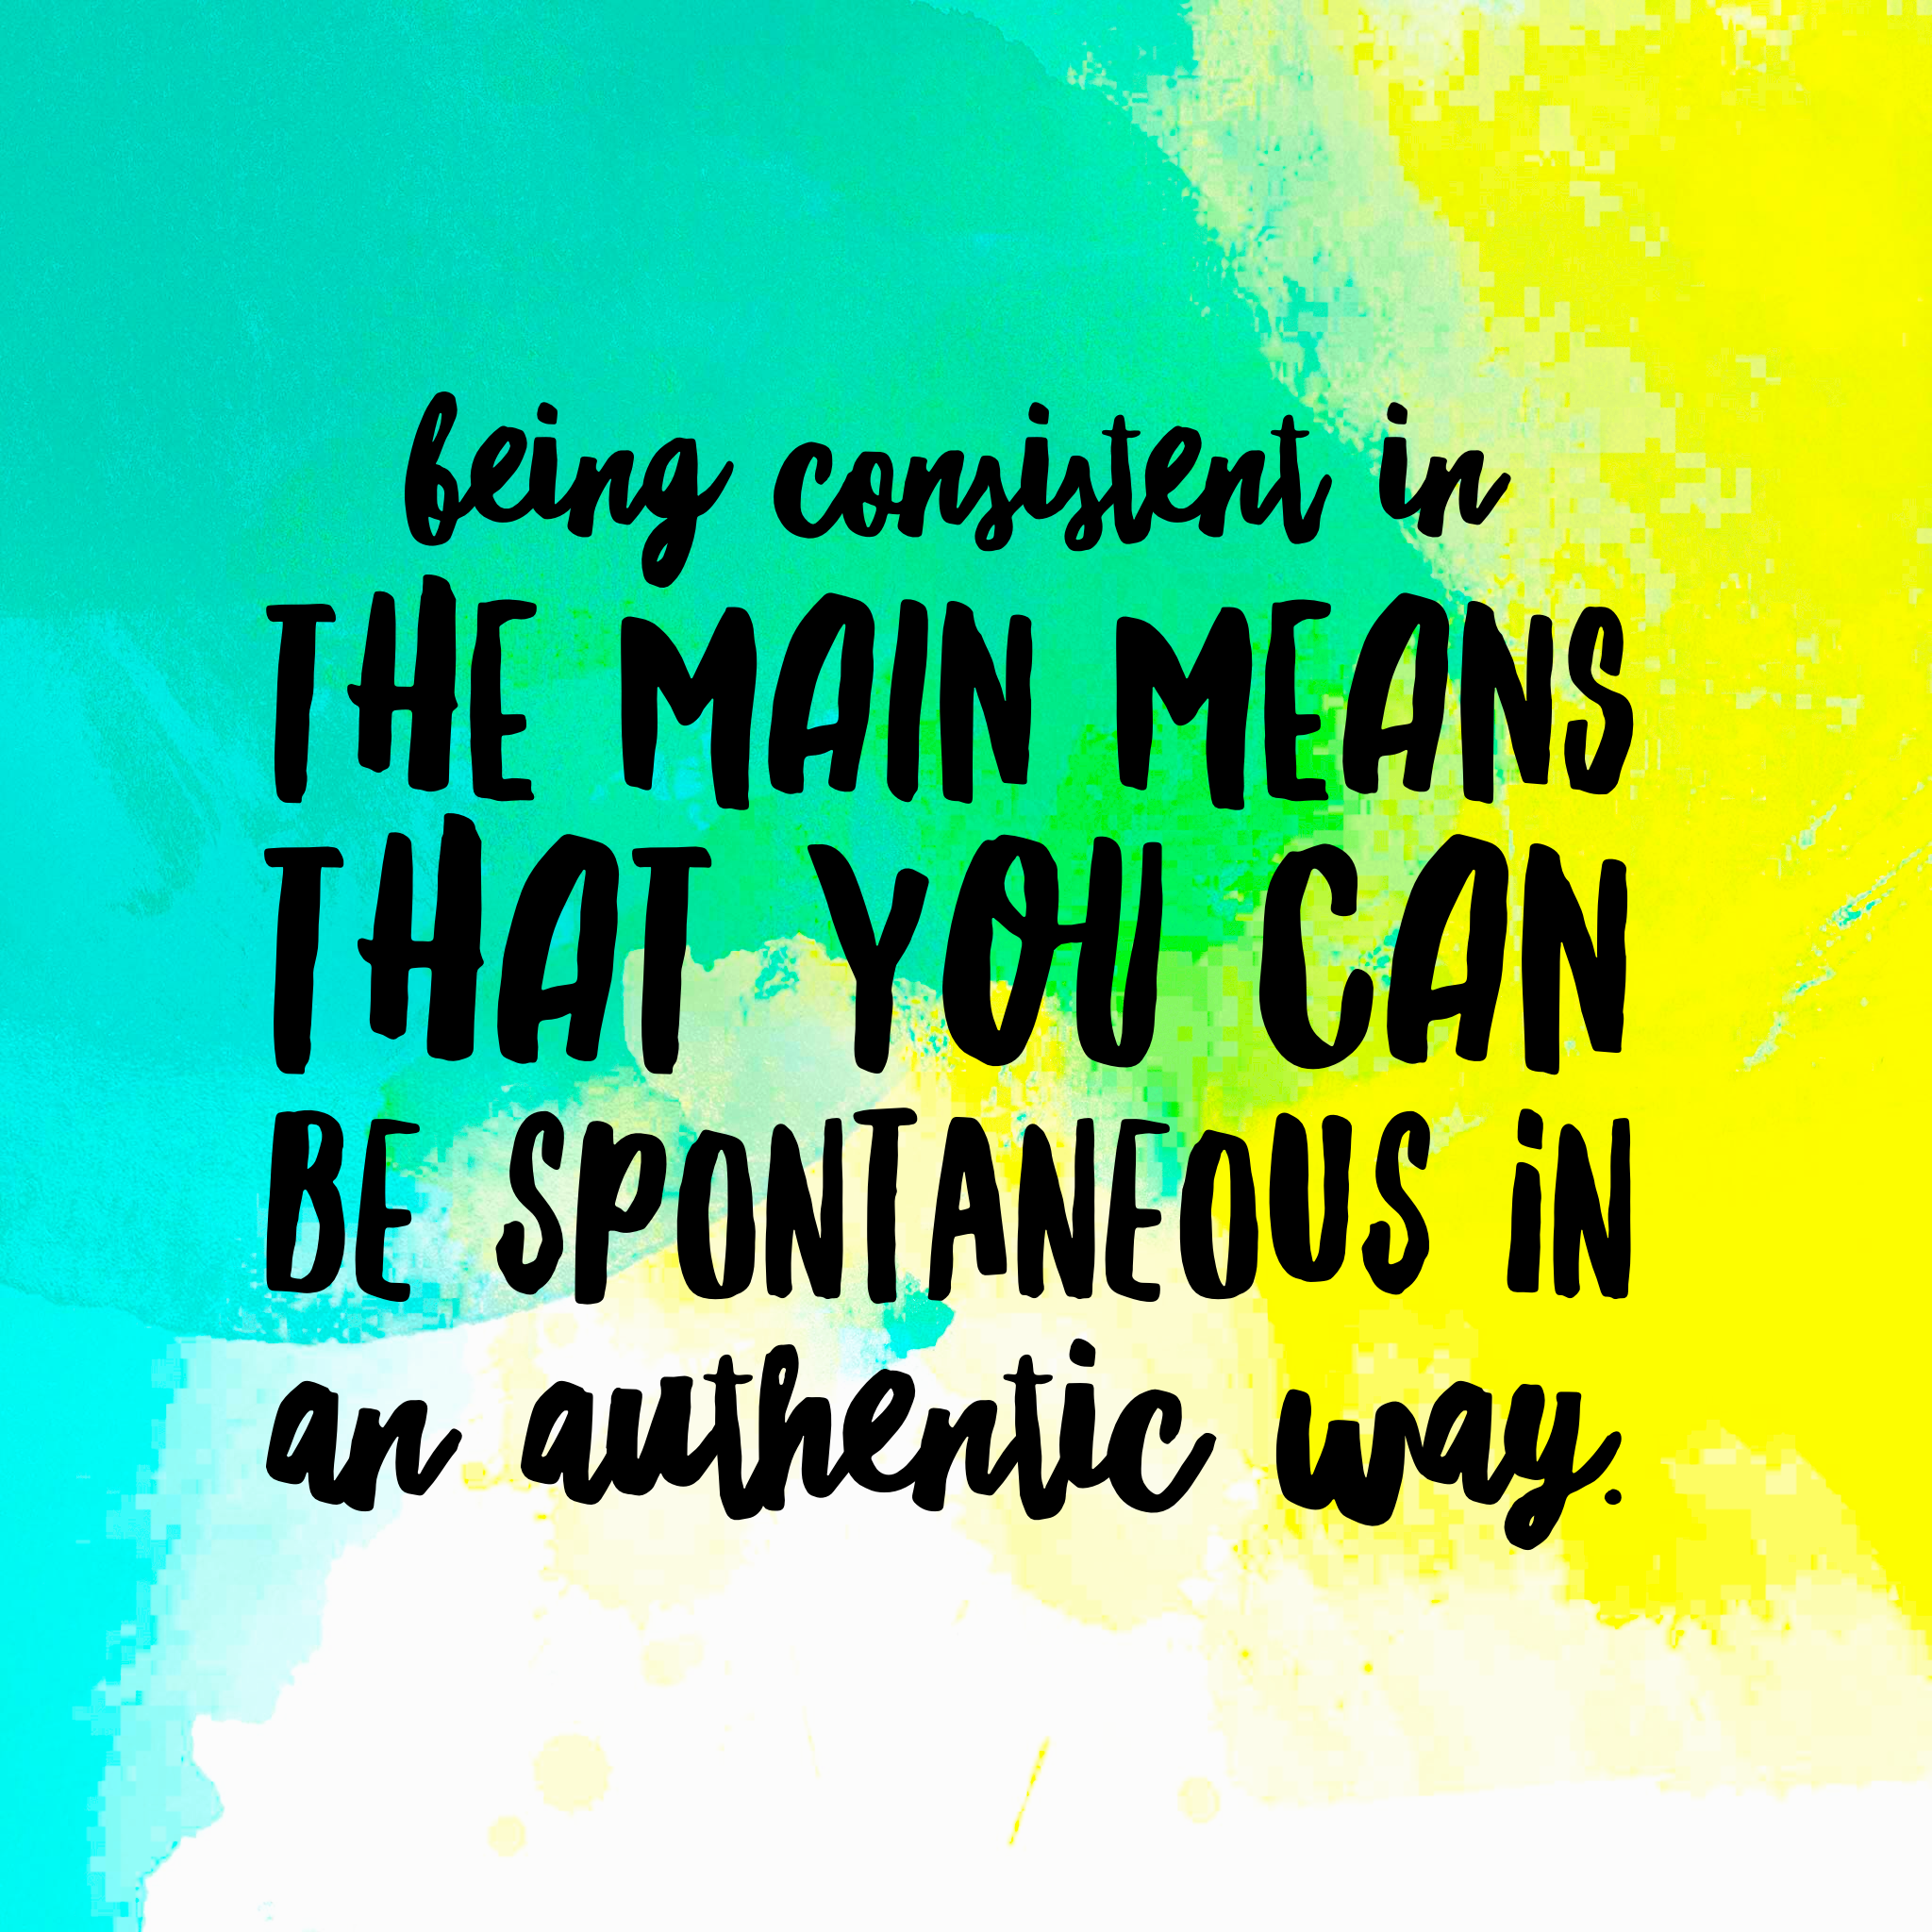 Being consistent in the main means that you can be spontaneous in an authentic way